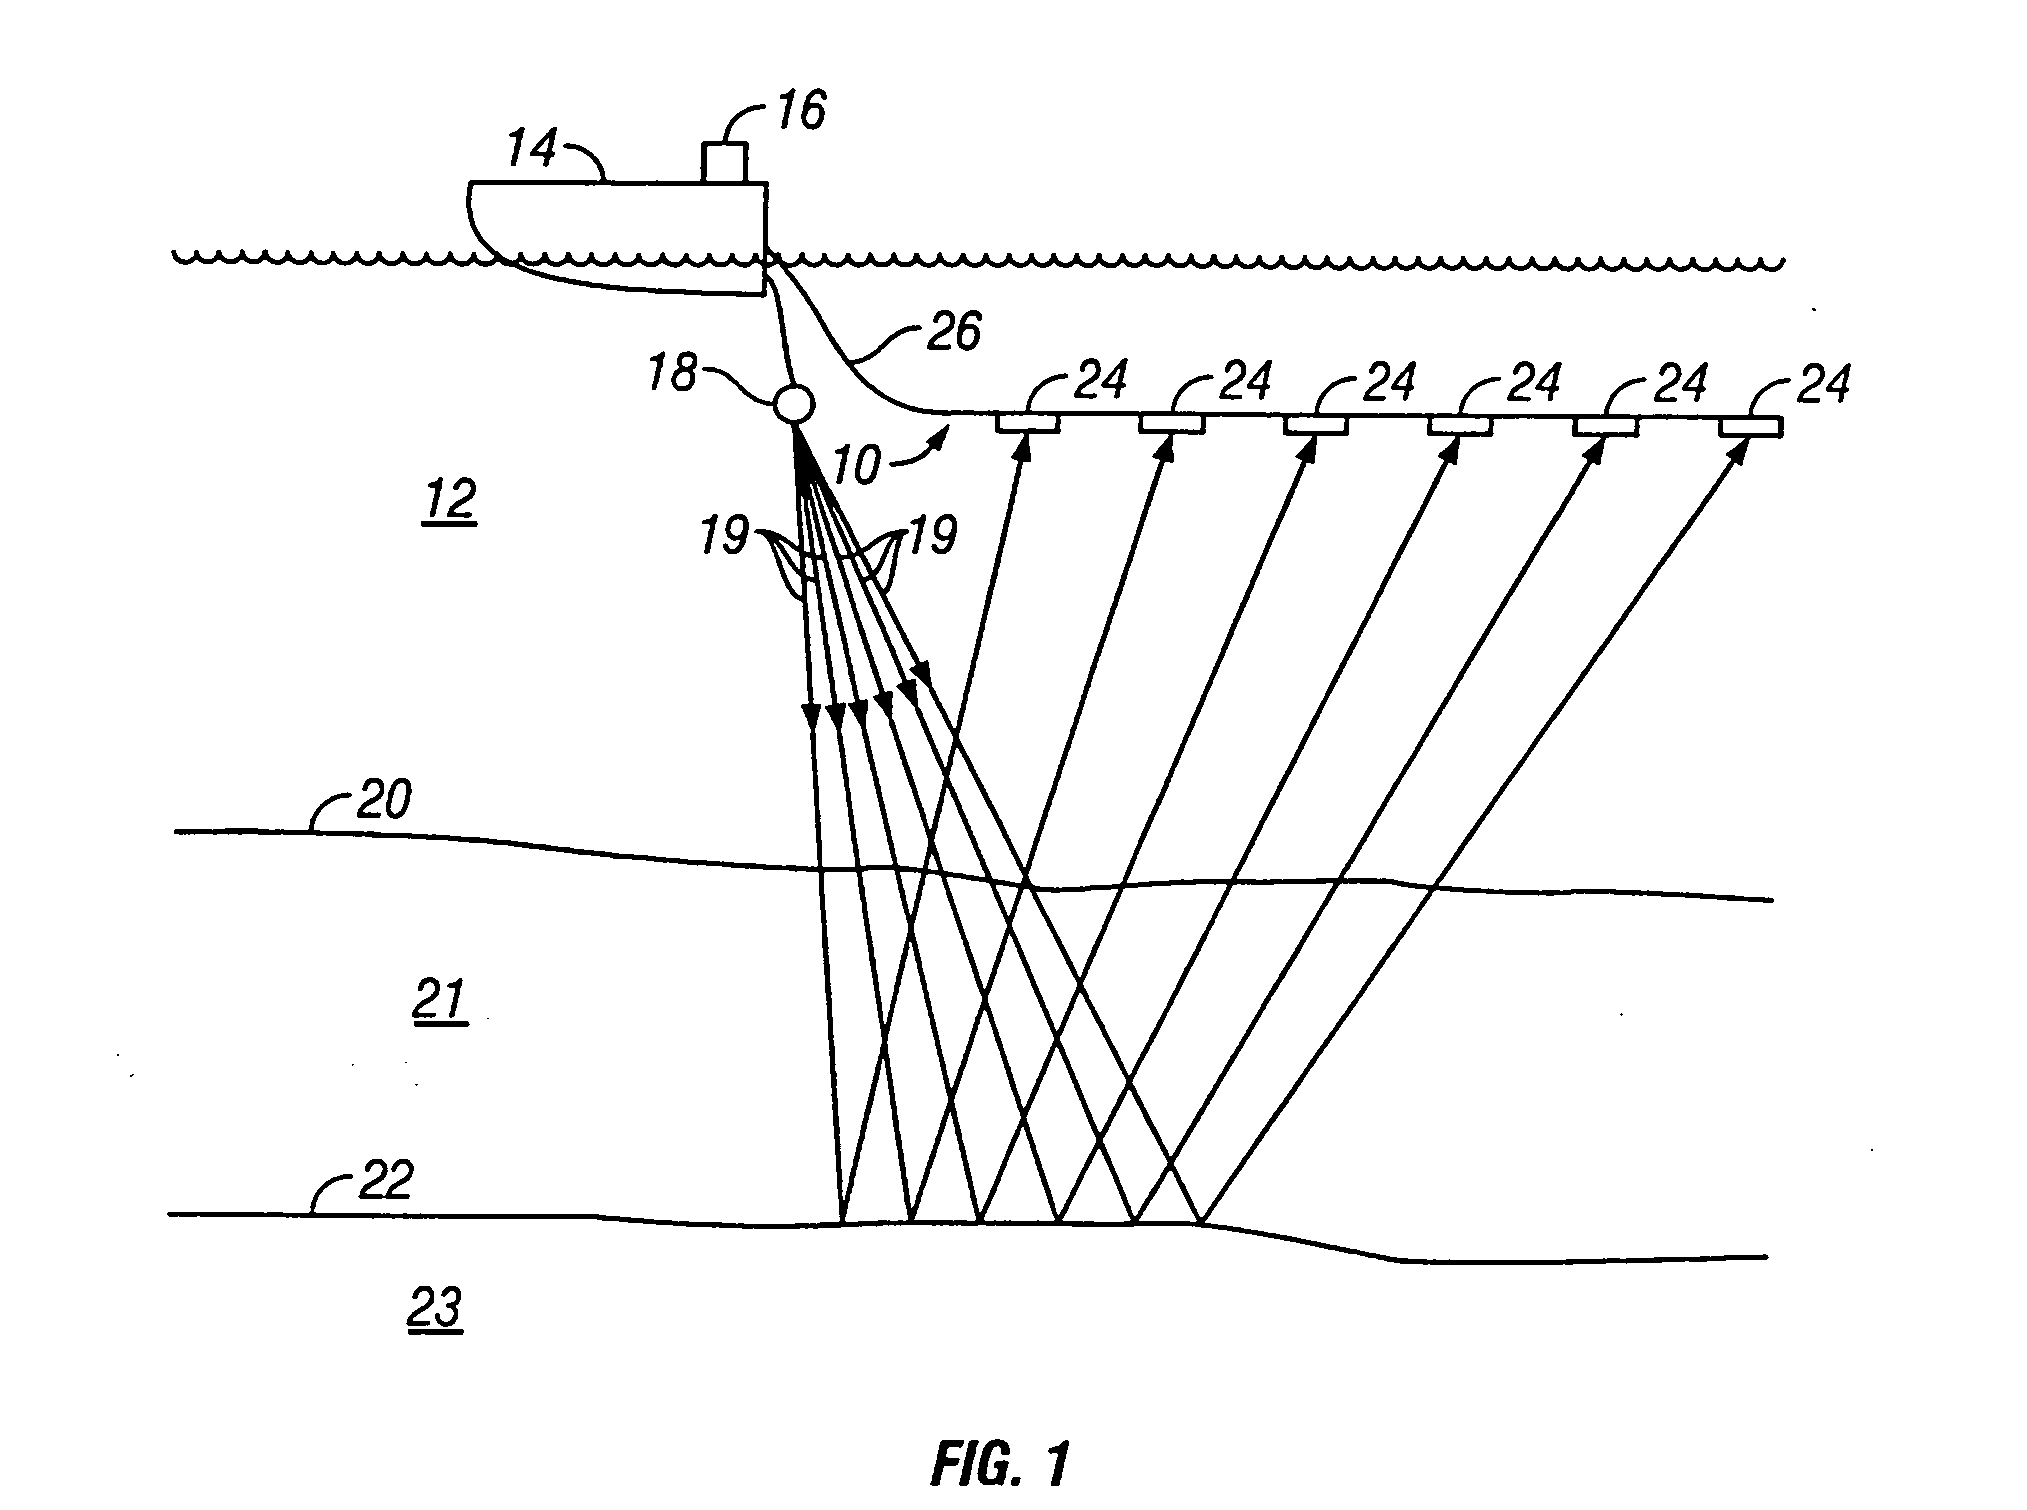 Marine seismic survey streamer configuration for reducing towing noise